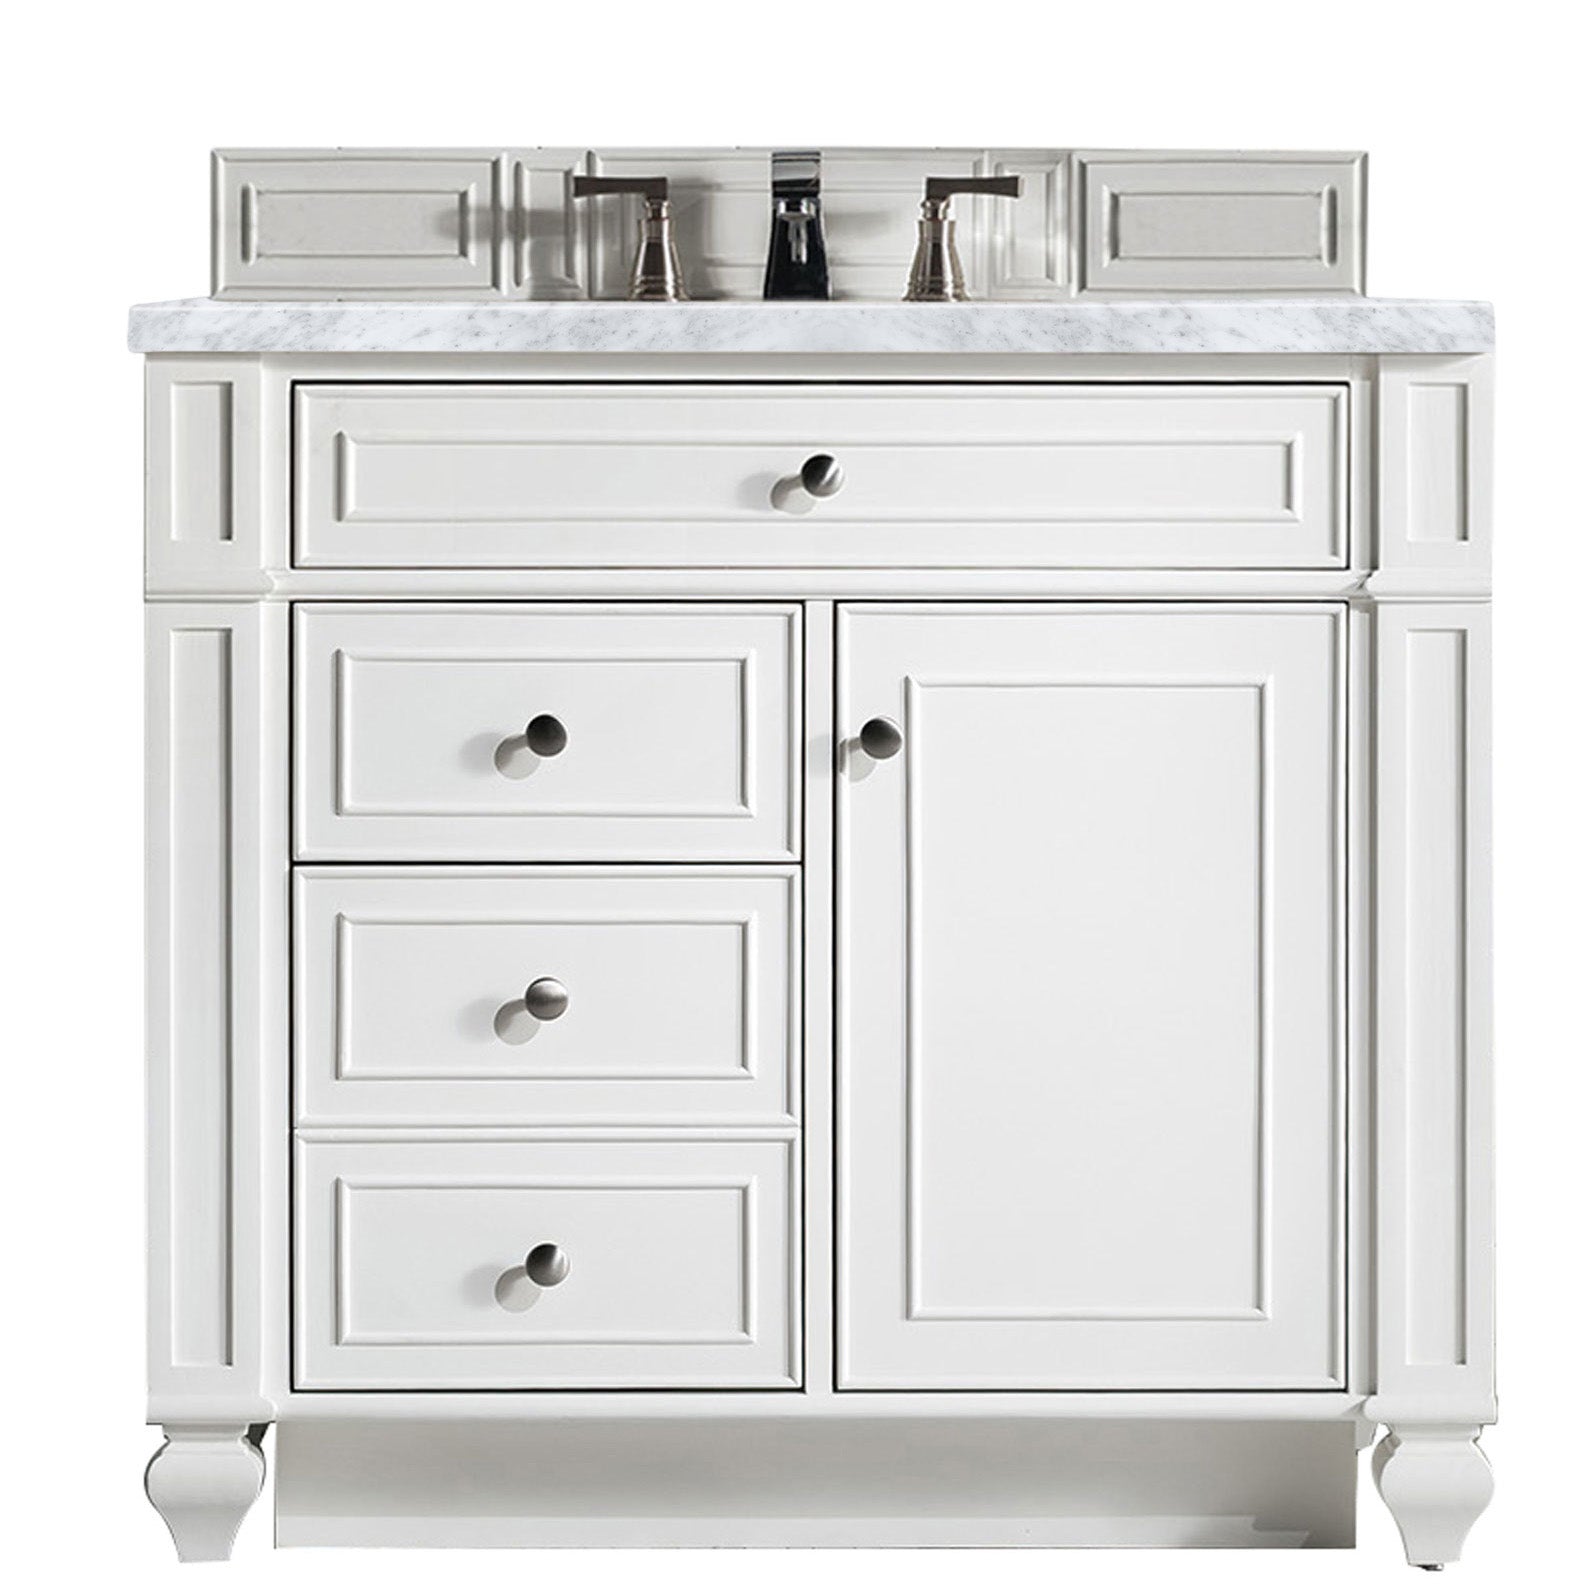 James Martin Vanities Bristol Collection 36 in. Single Vanity in Bright White with Countertop Options Carrara Marble